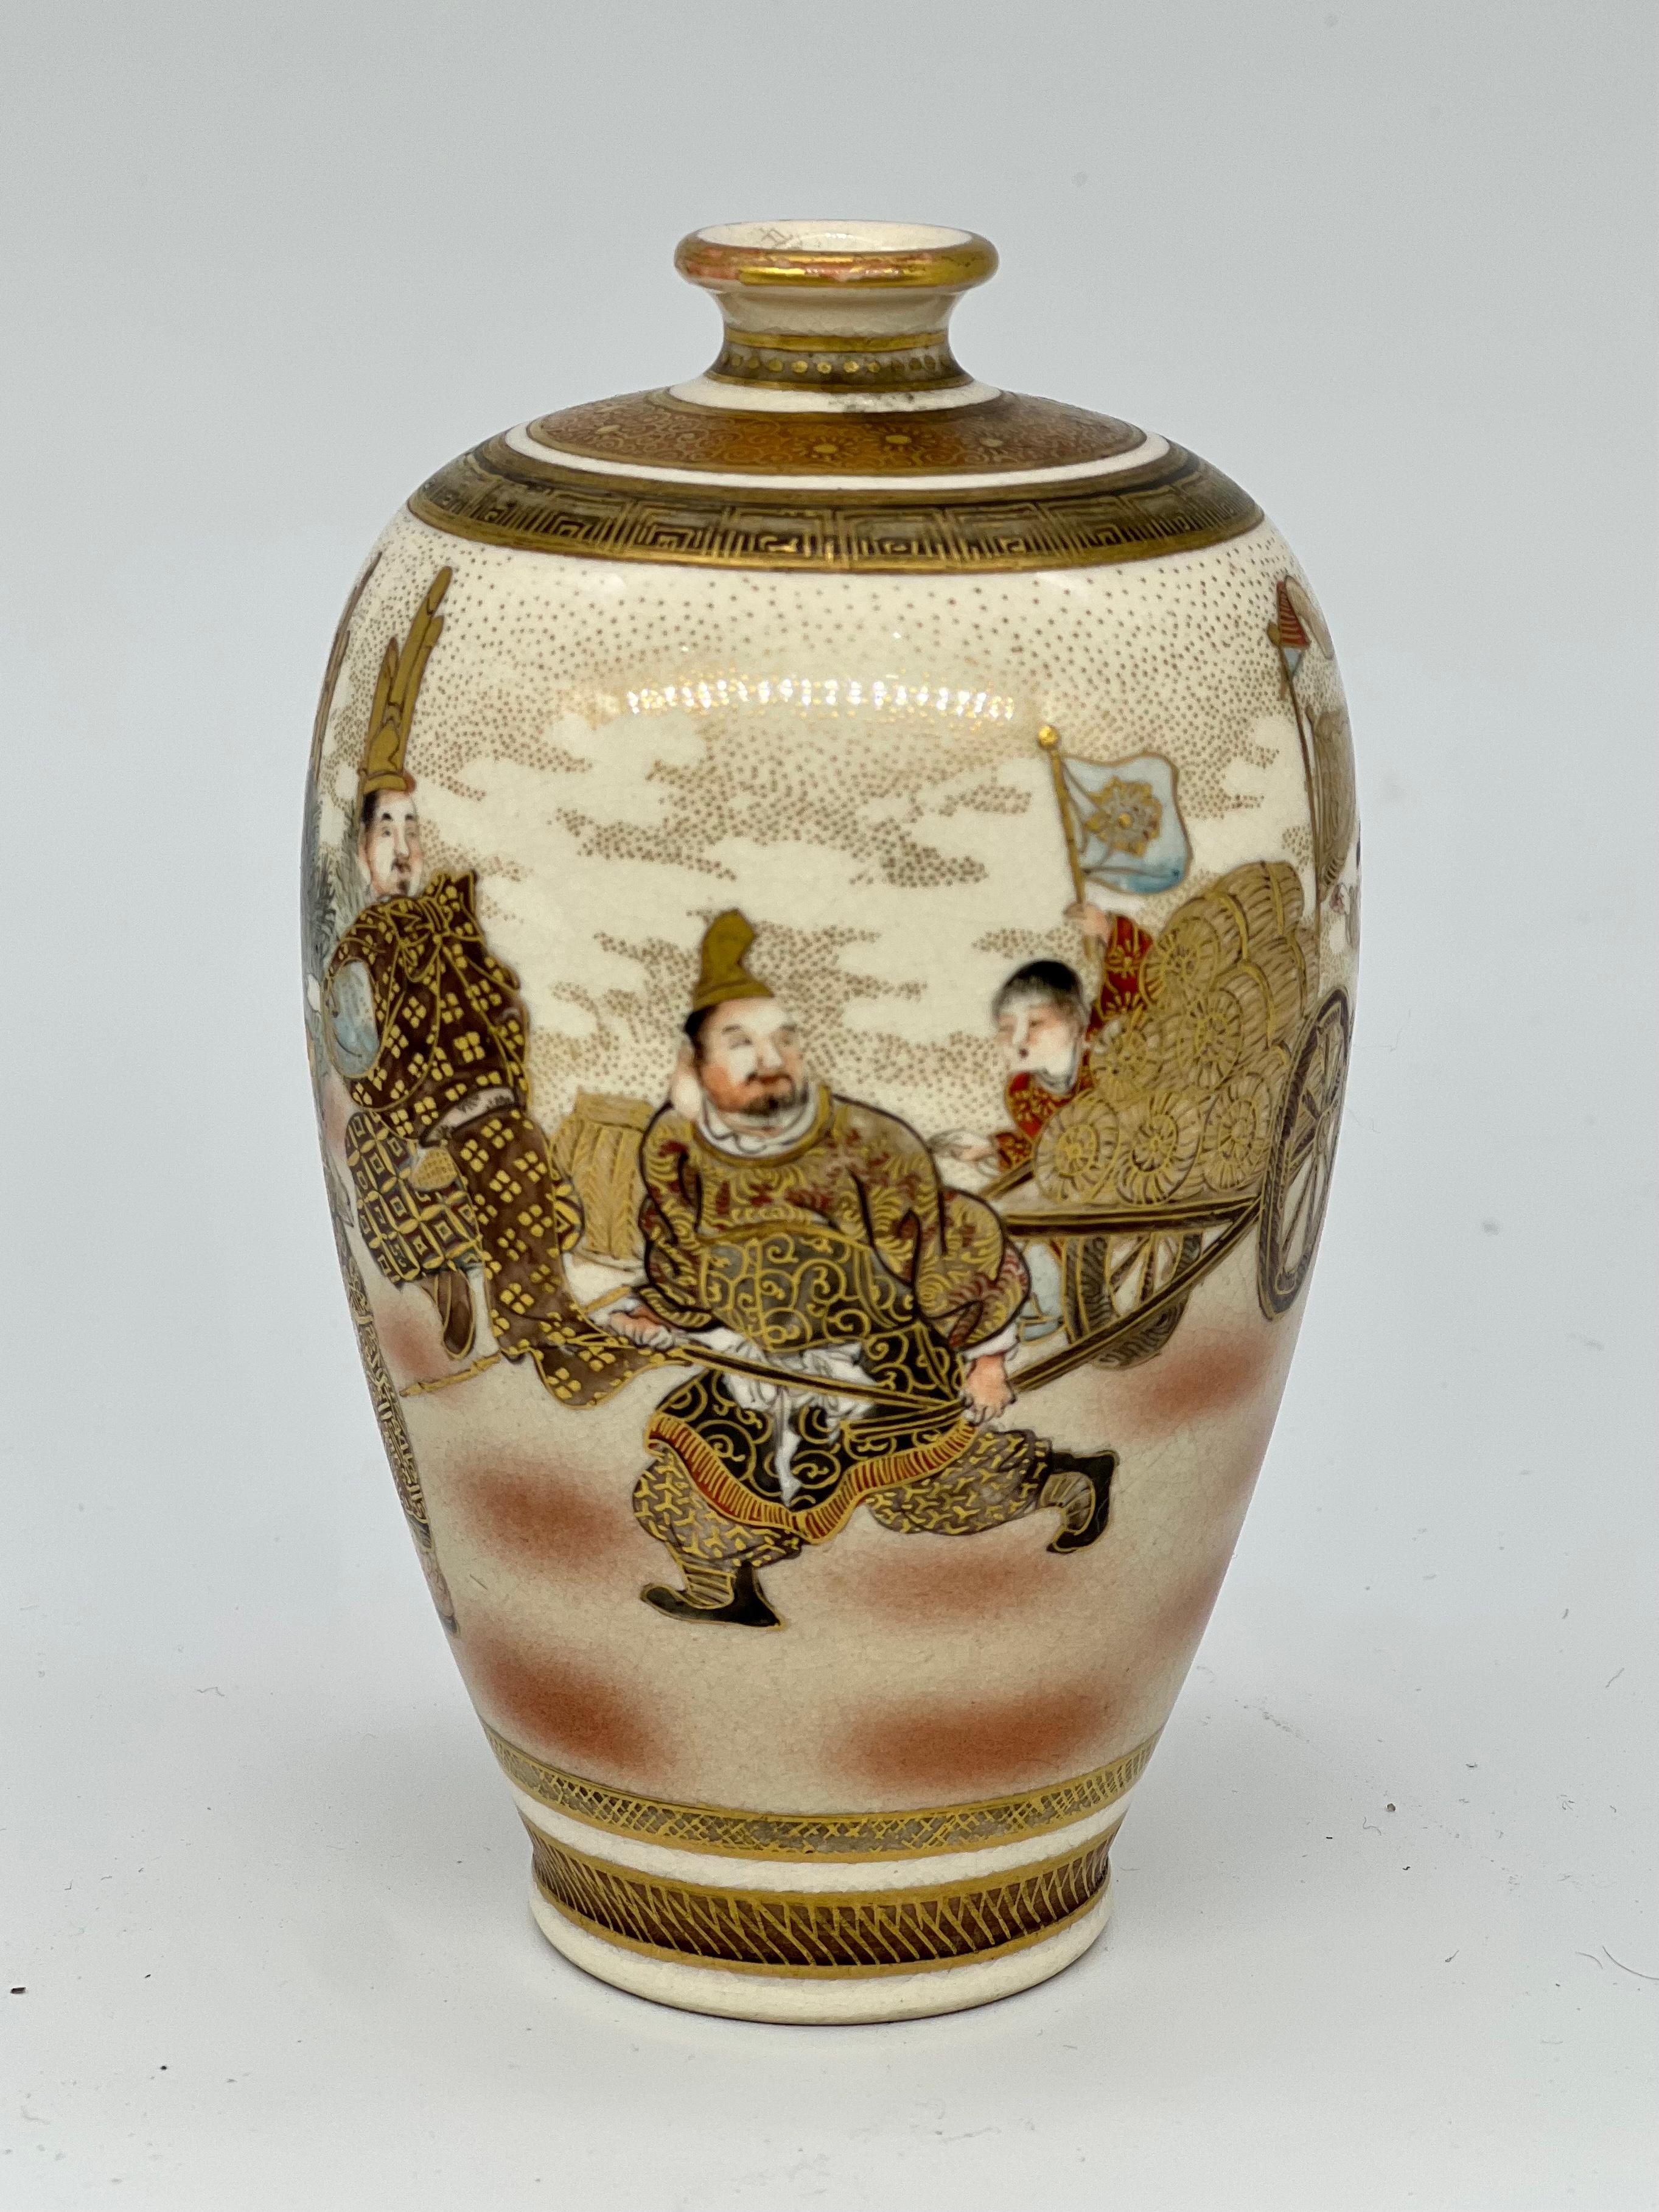 Fine Antique Japanese Satsuma Ovoid Vase, Signed-Dozan, 19th Century In Good Condition For Sale In London, GB